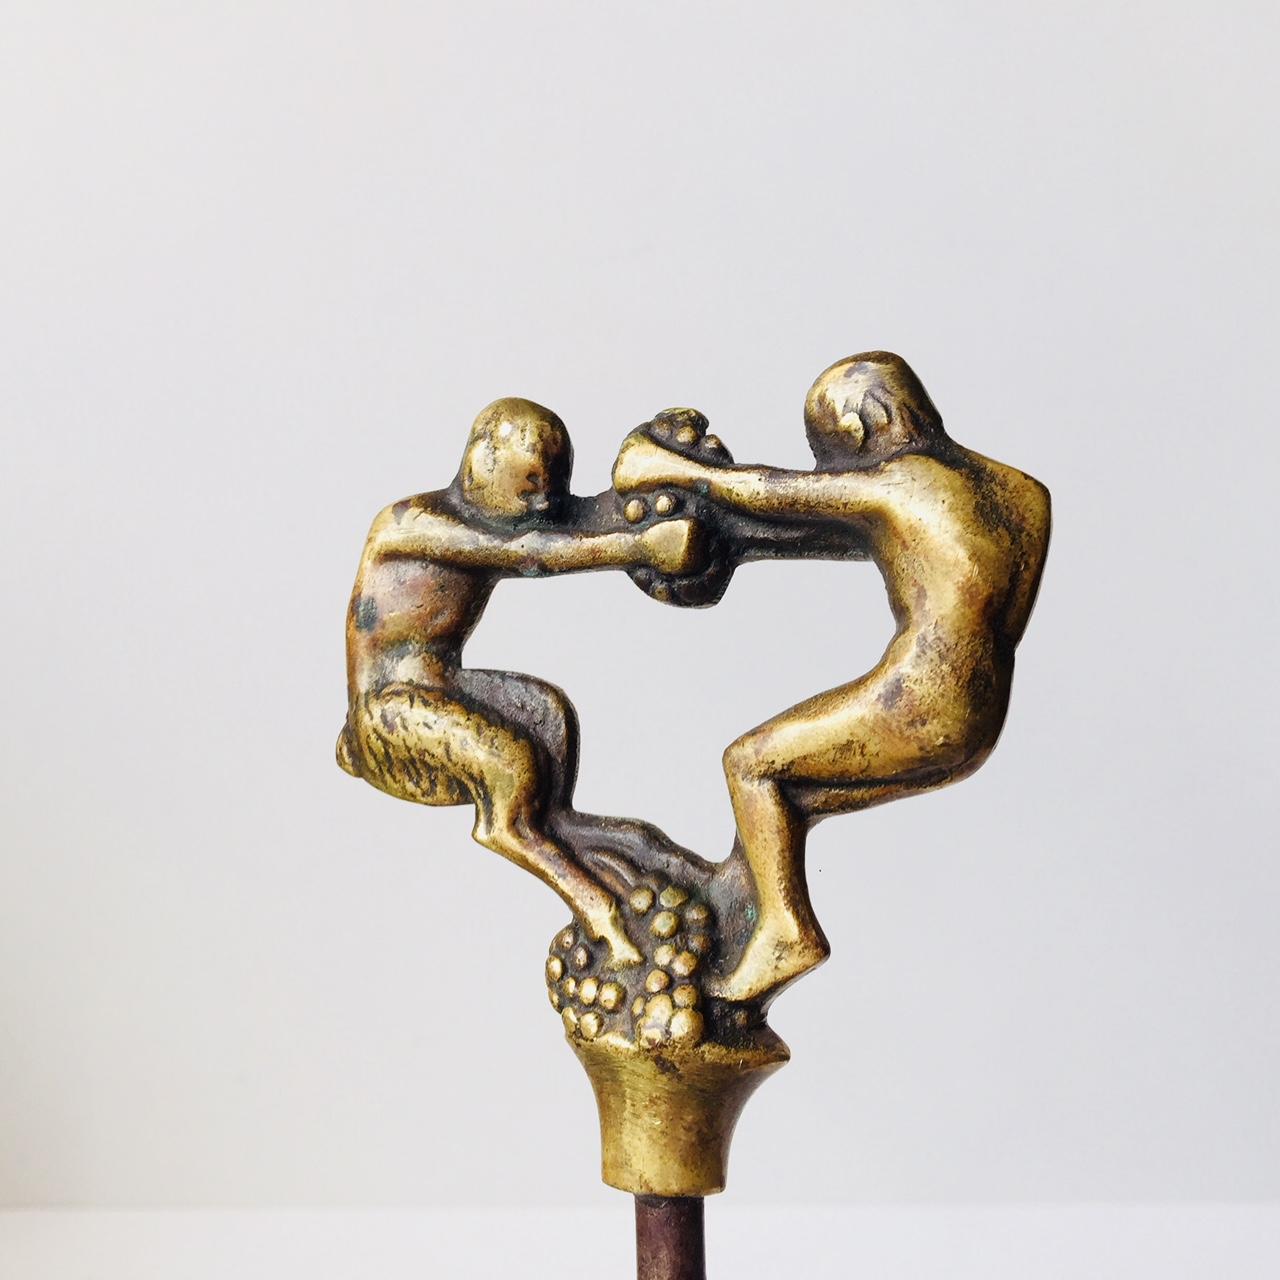 This vintage corkscrew in brass and steel was designed by Kay Bojesen in the early 1920s and manufactured by E. Dragsted in Copenhagen. The top of the corkscrew depicts a faun fighting a man over grapes.